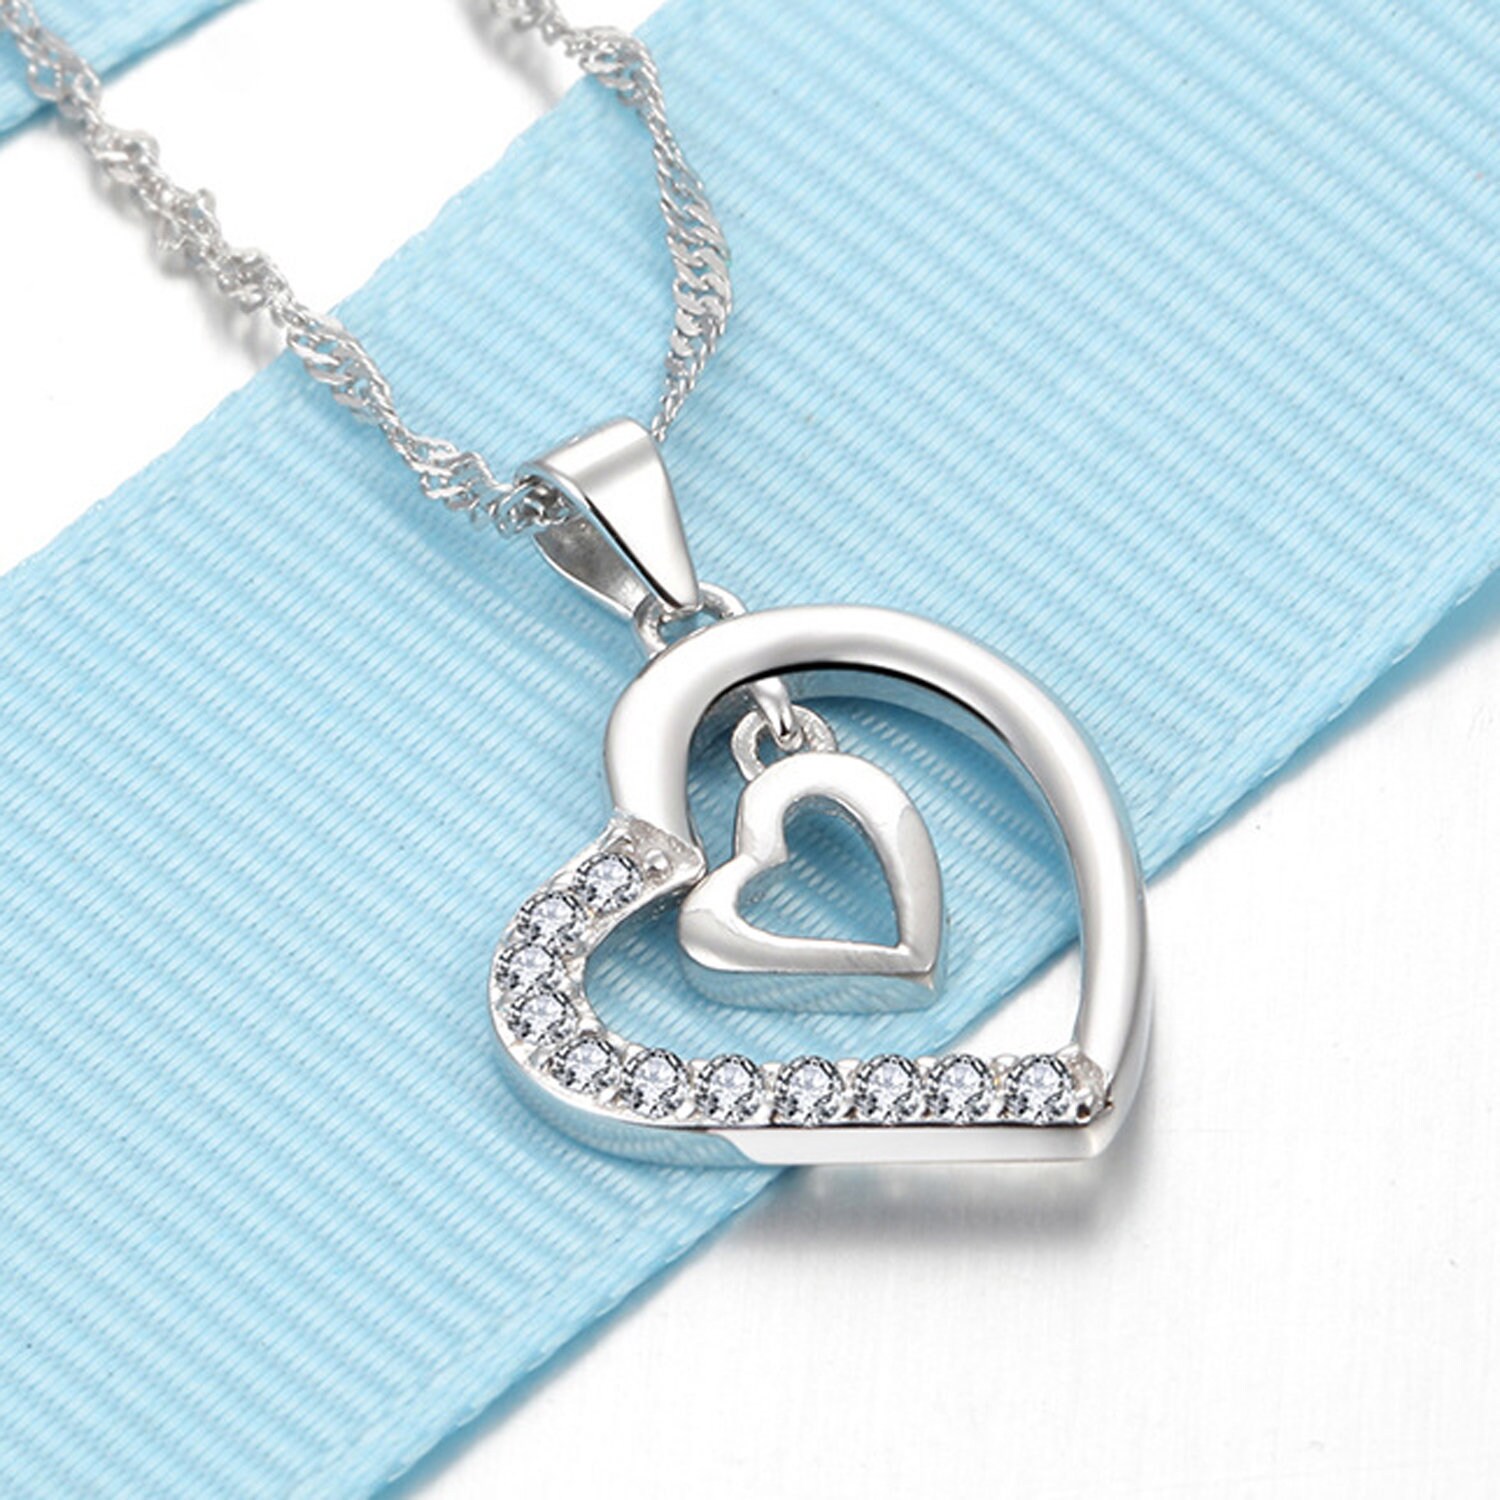 Details about   Solid 925 Sterling Silver Triquetras Heart Love Necklace Box Toggle Chain Gift 